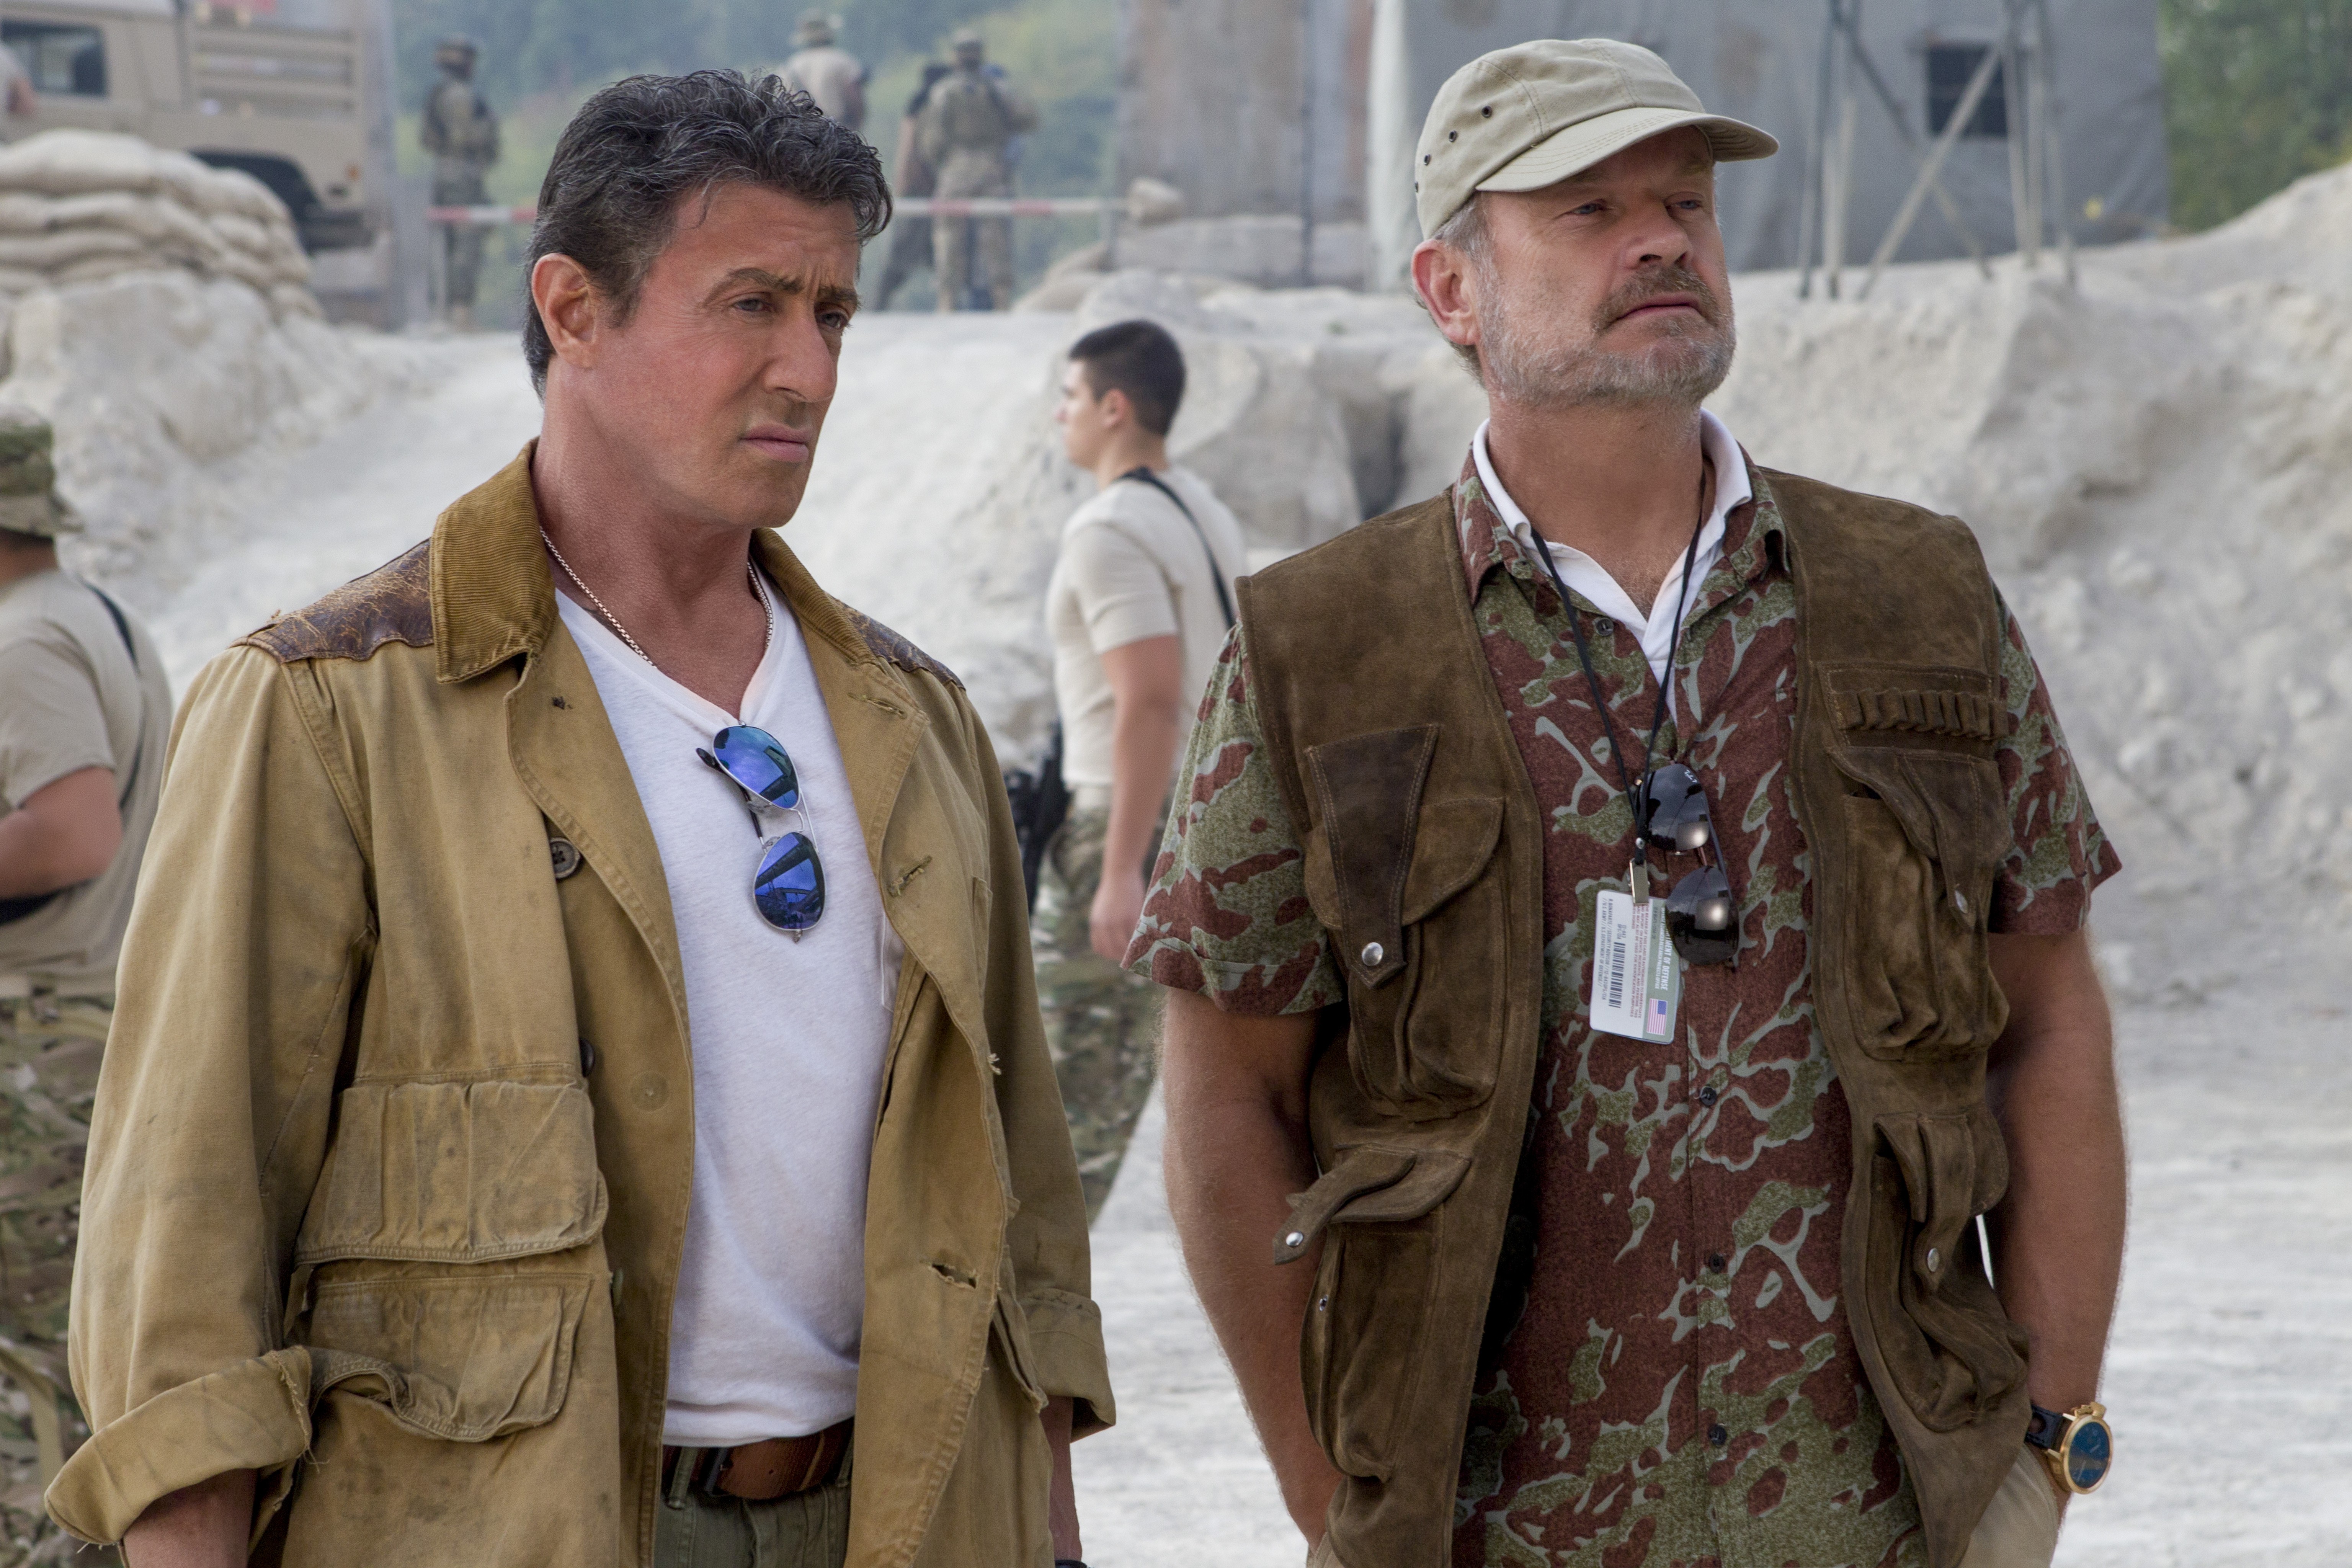 movie, the expendables 3, barney ross, bonaparte (the expendables), kelsey grammer, sylvester stallone, the expendables